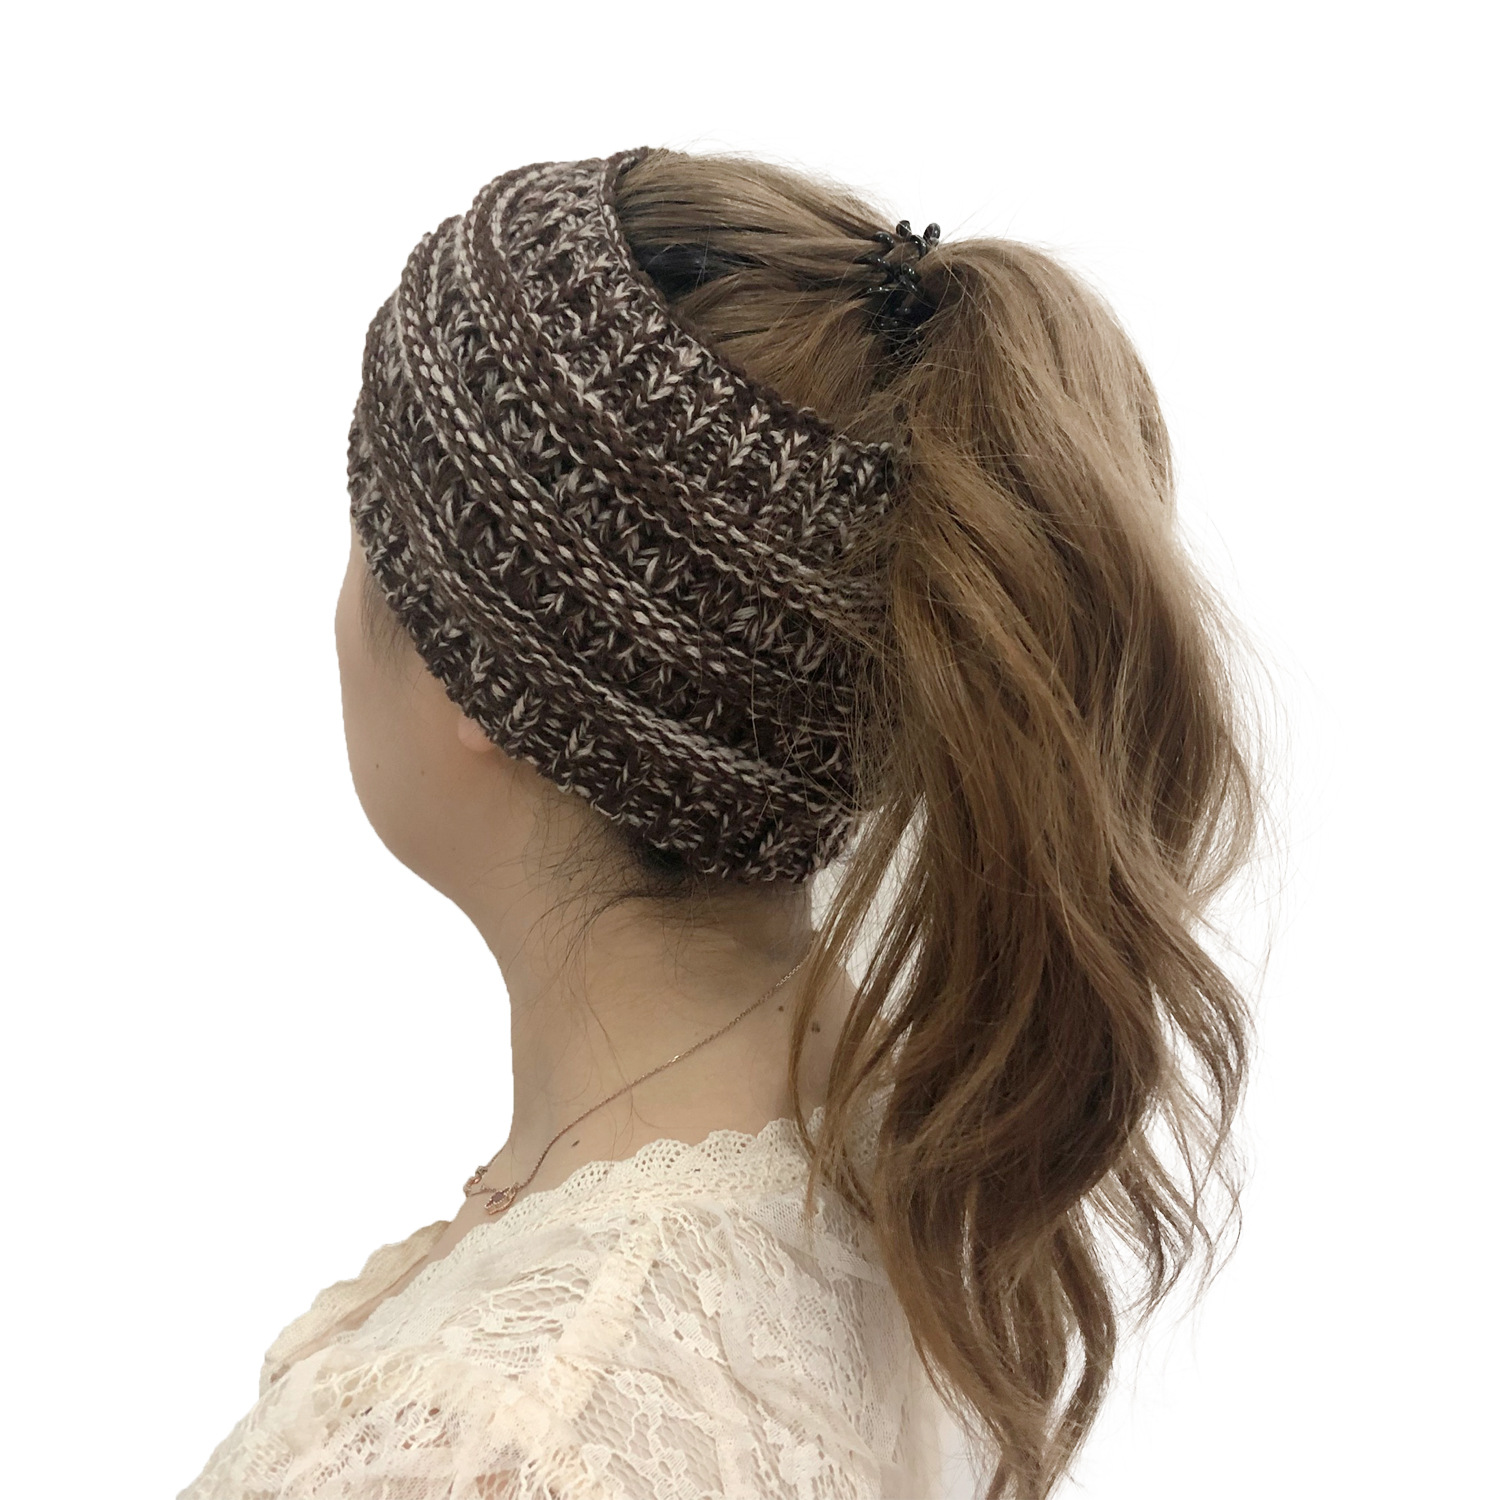 Wool Head Cap Hair Band Empty Top Horsetail Knitted Wool Twist Braided Cable Knitted